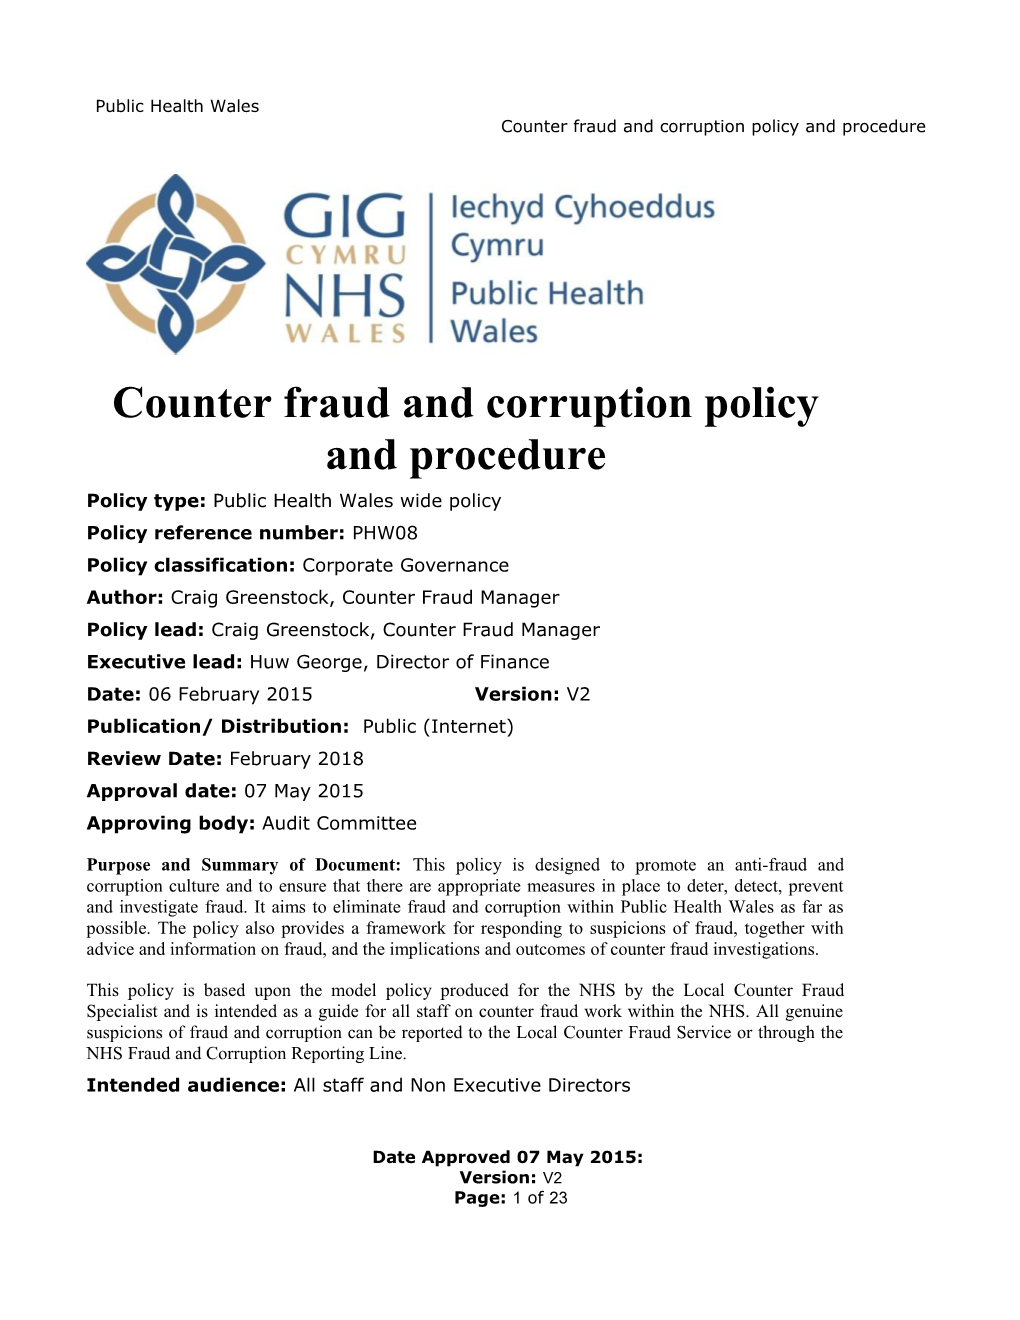 1.1The NHS Counter Fraud Service